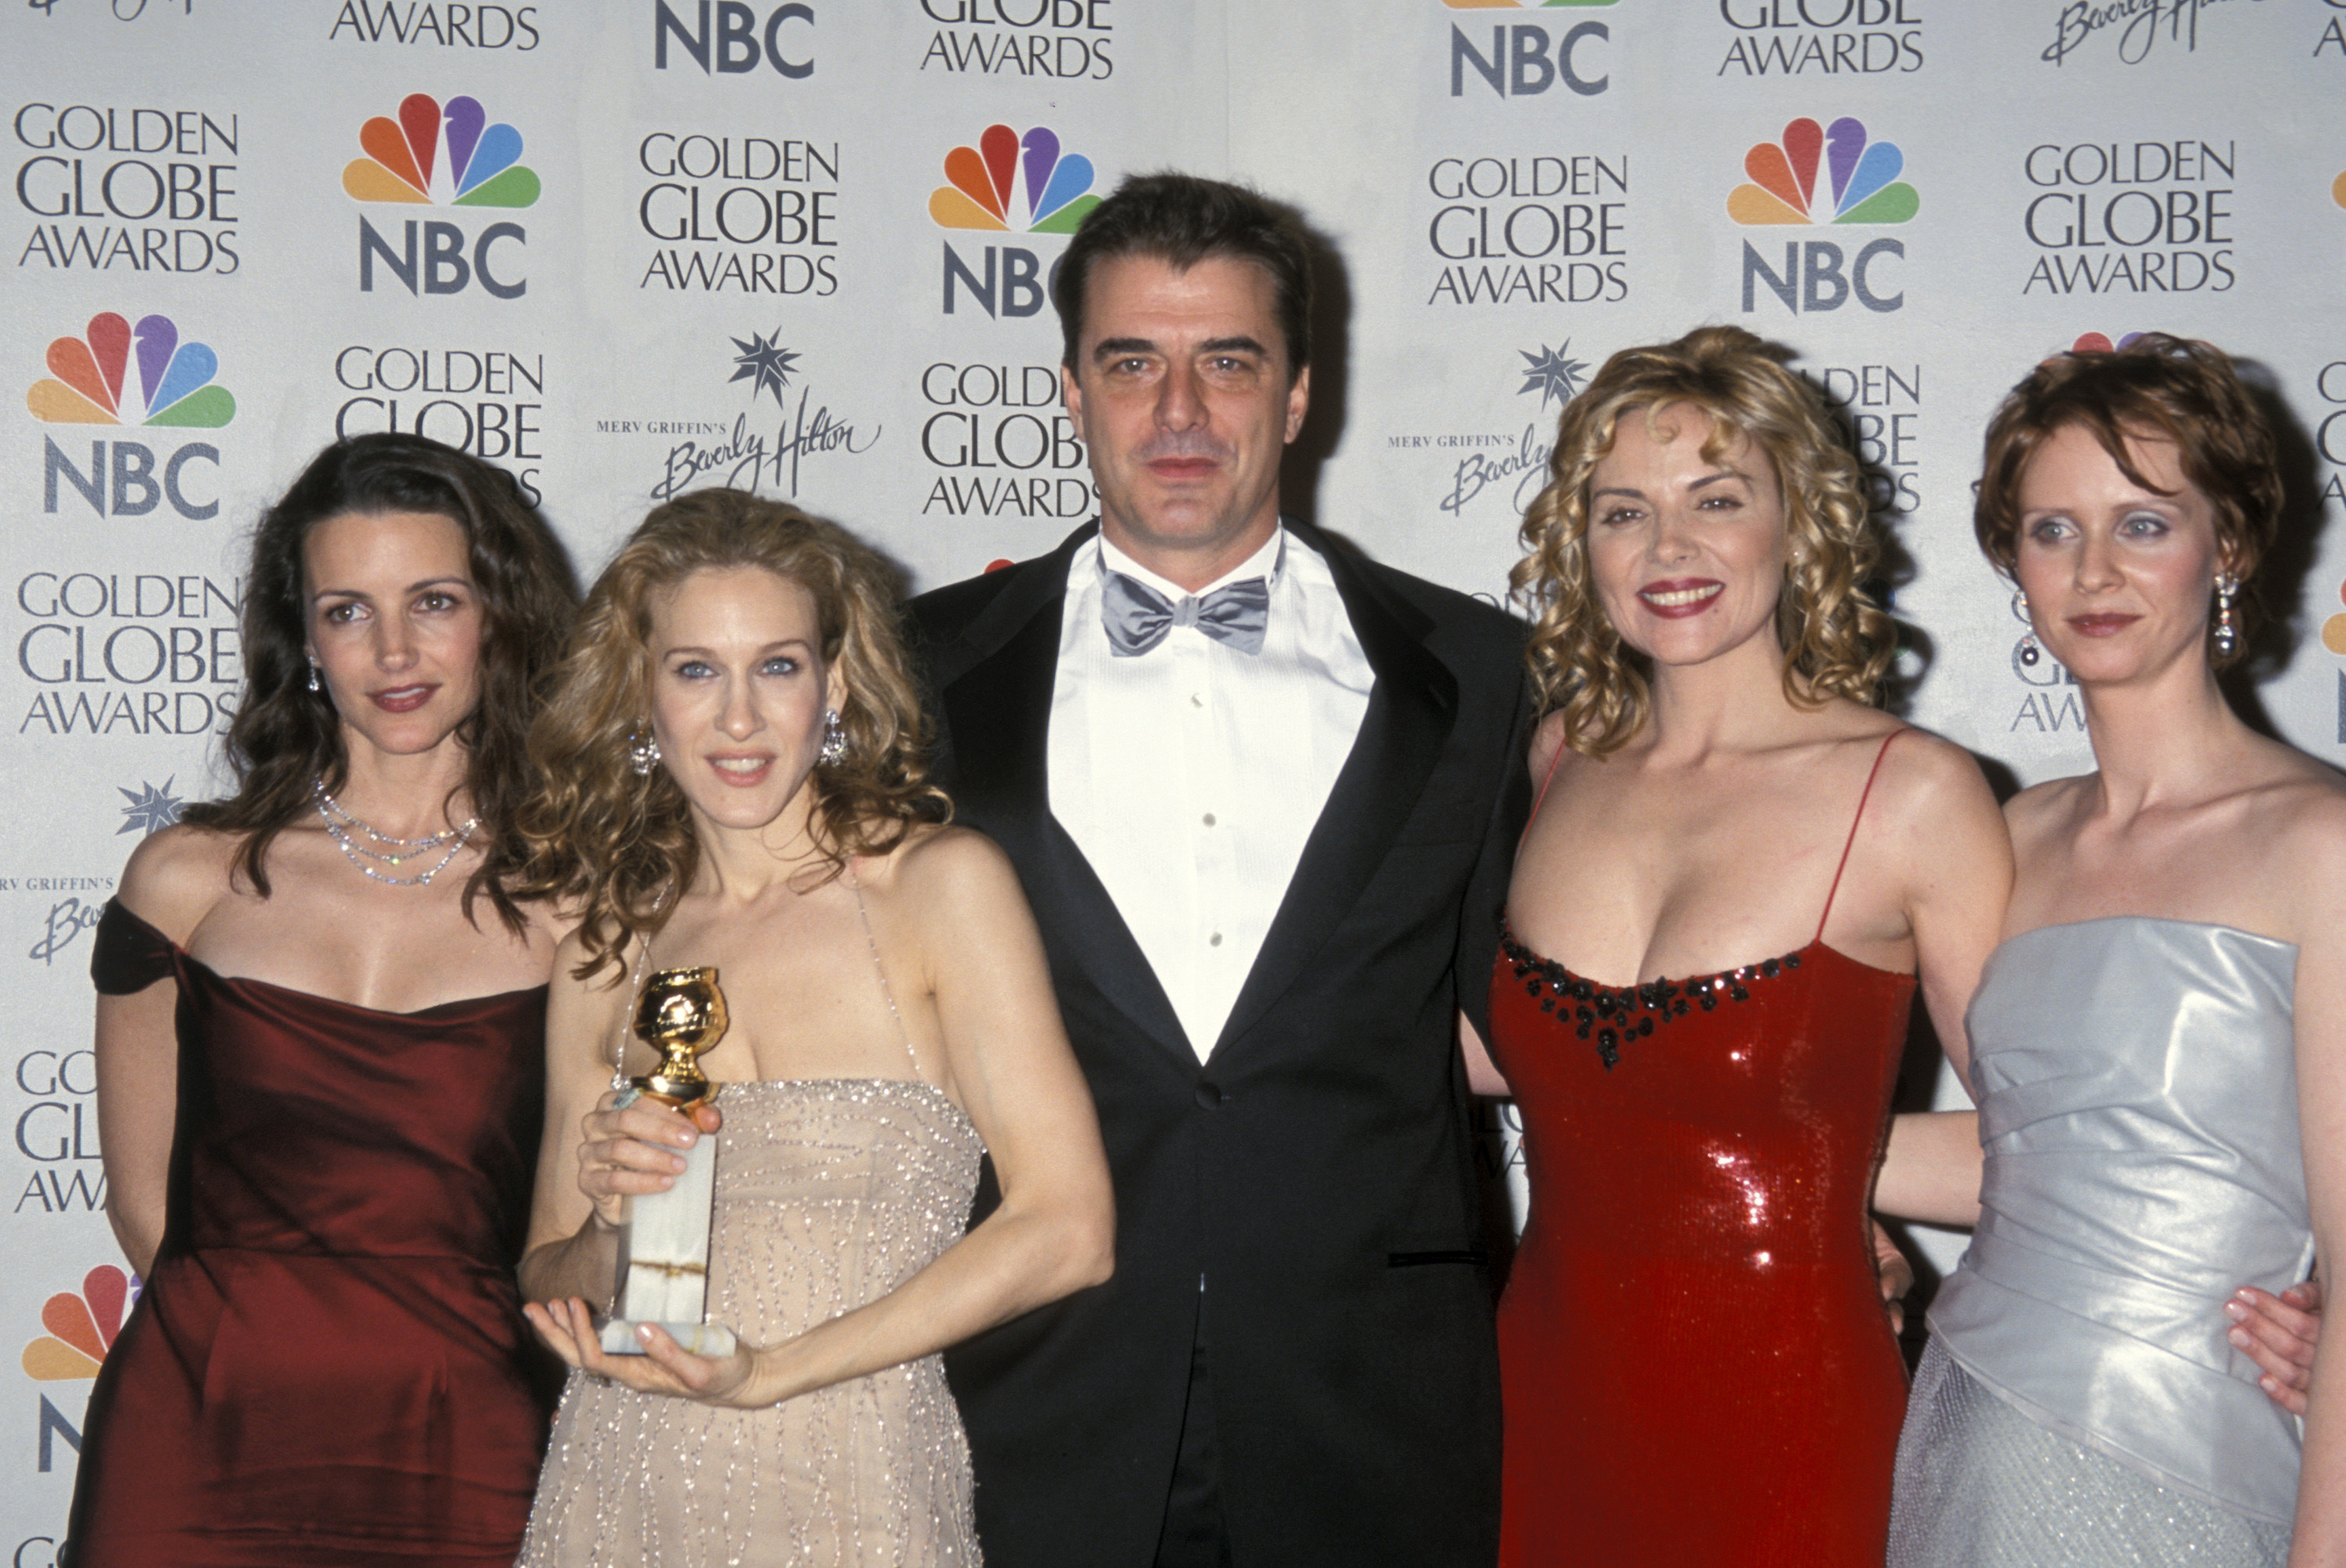 Kristin, SJP, Chris, Kim, and Cynthia standing together arm in arm with a Golden Globe award